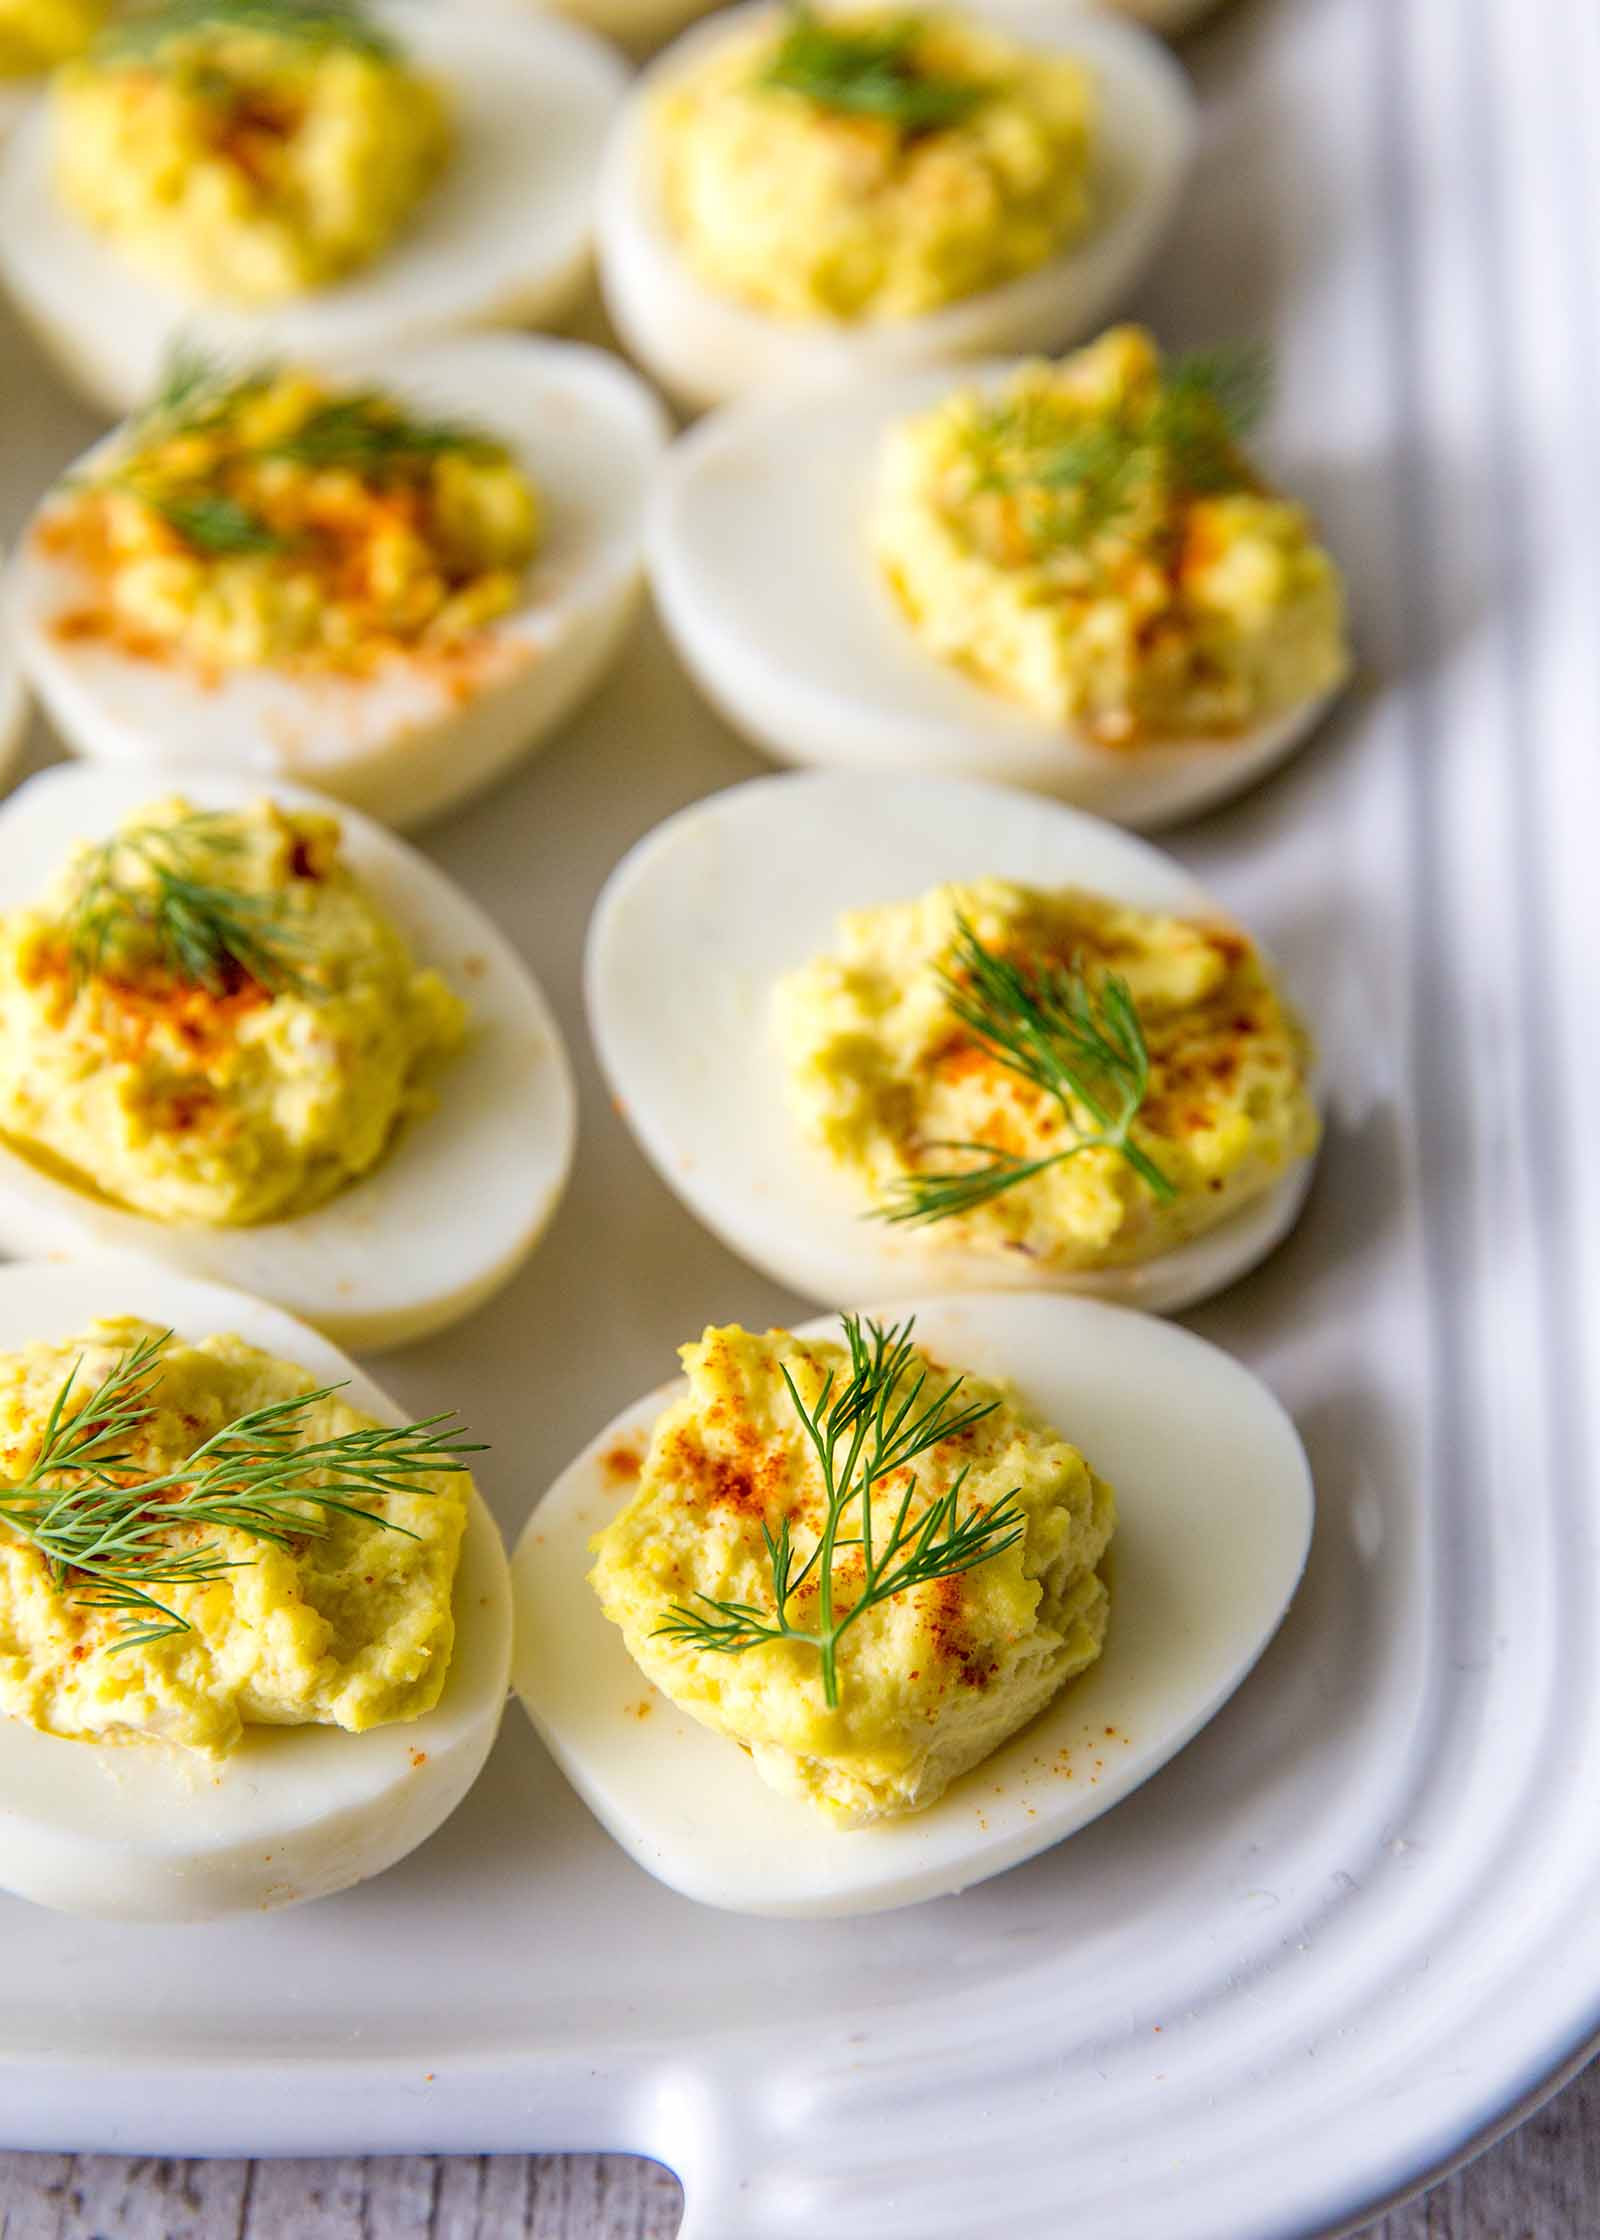 Deviled Eggs With Horseradish
 Deviled Eggs with Horseradish and Dill Recipe